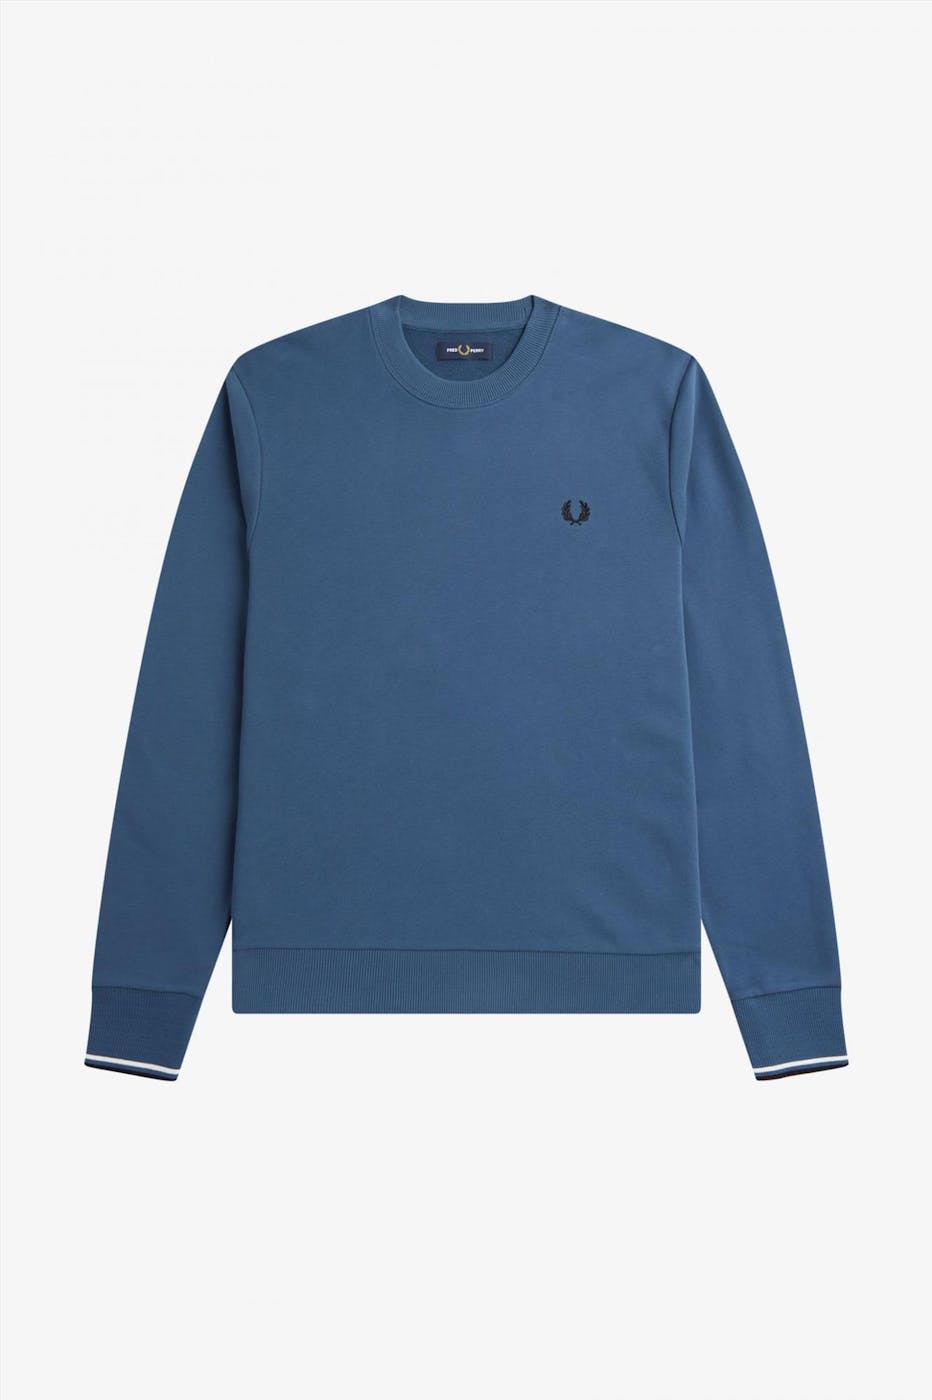 Fred Perry - Blauwe Crew Neck sweater